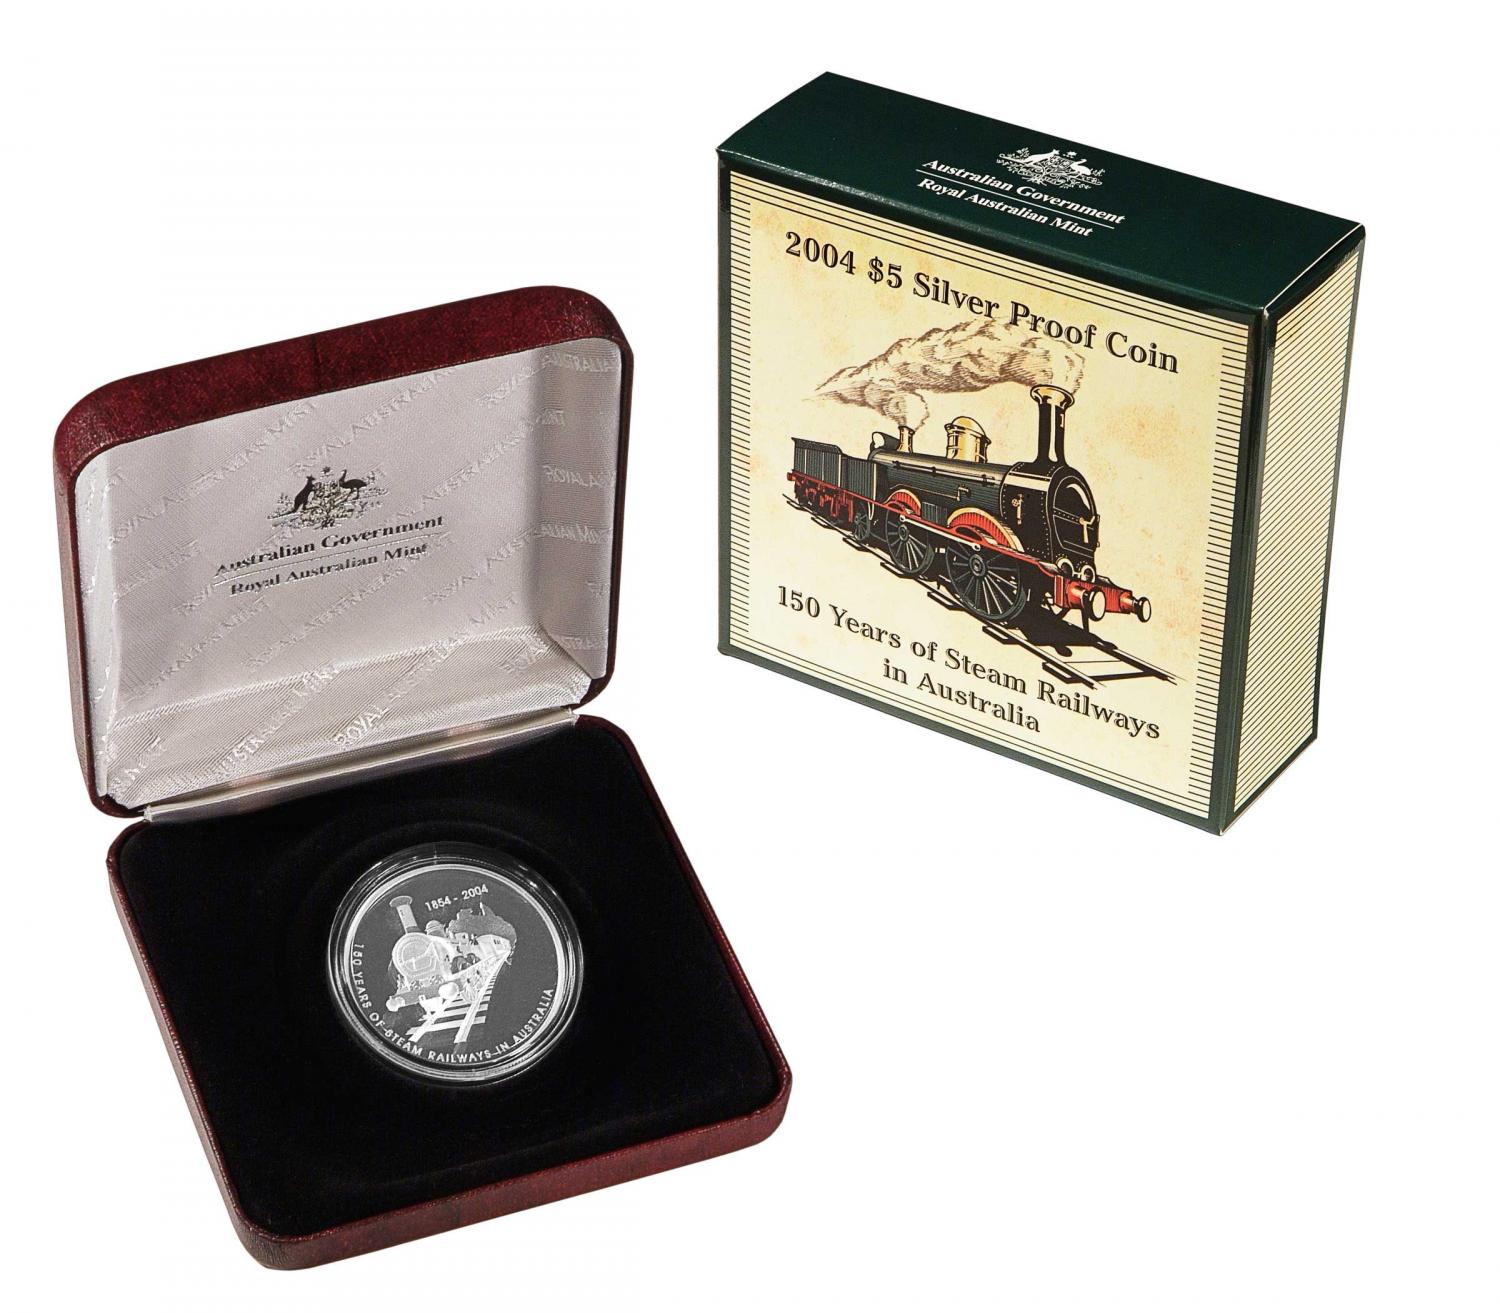 Thumbnail for 2004 Five Dollar Silver Proof Coin - 150 Years of Steam Railway In Australia